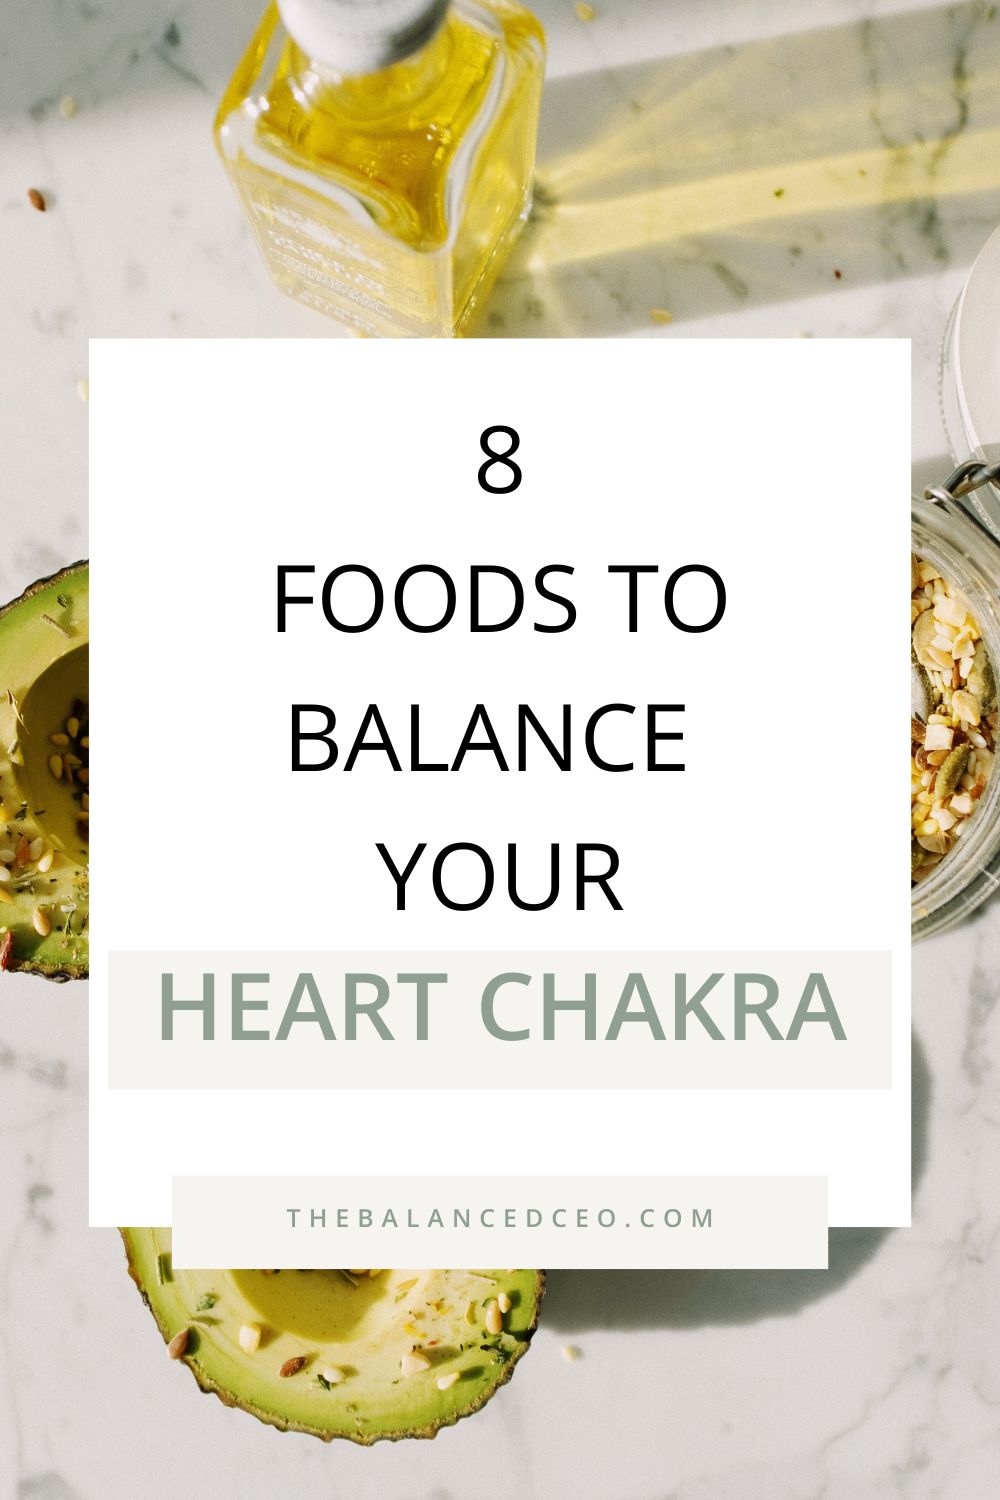 8 Foods to Balance Your Heart Chakra